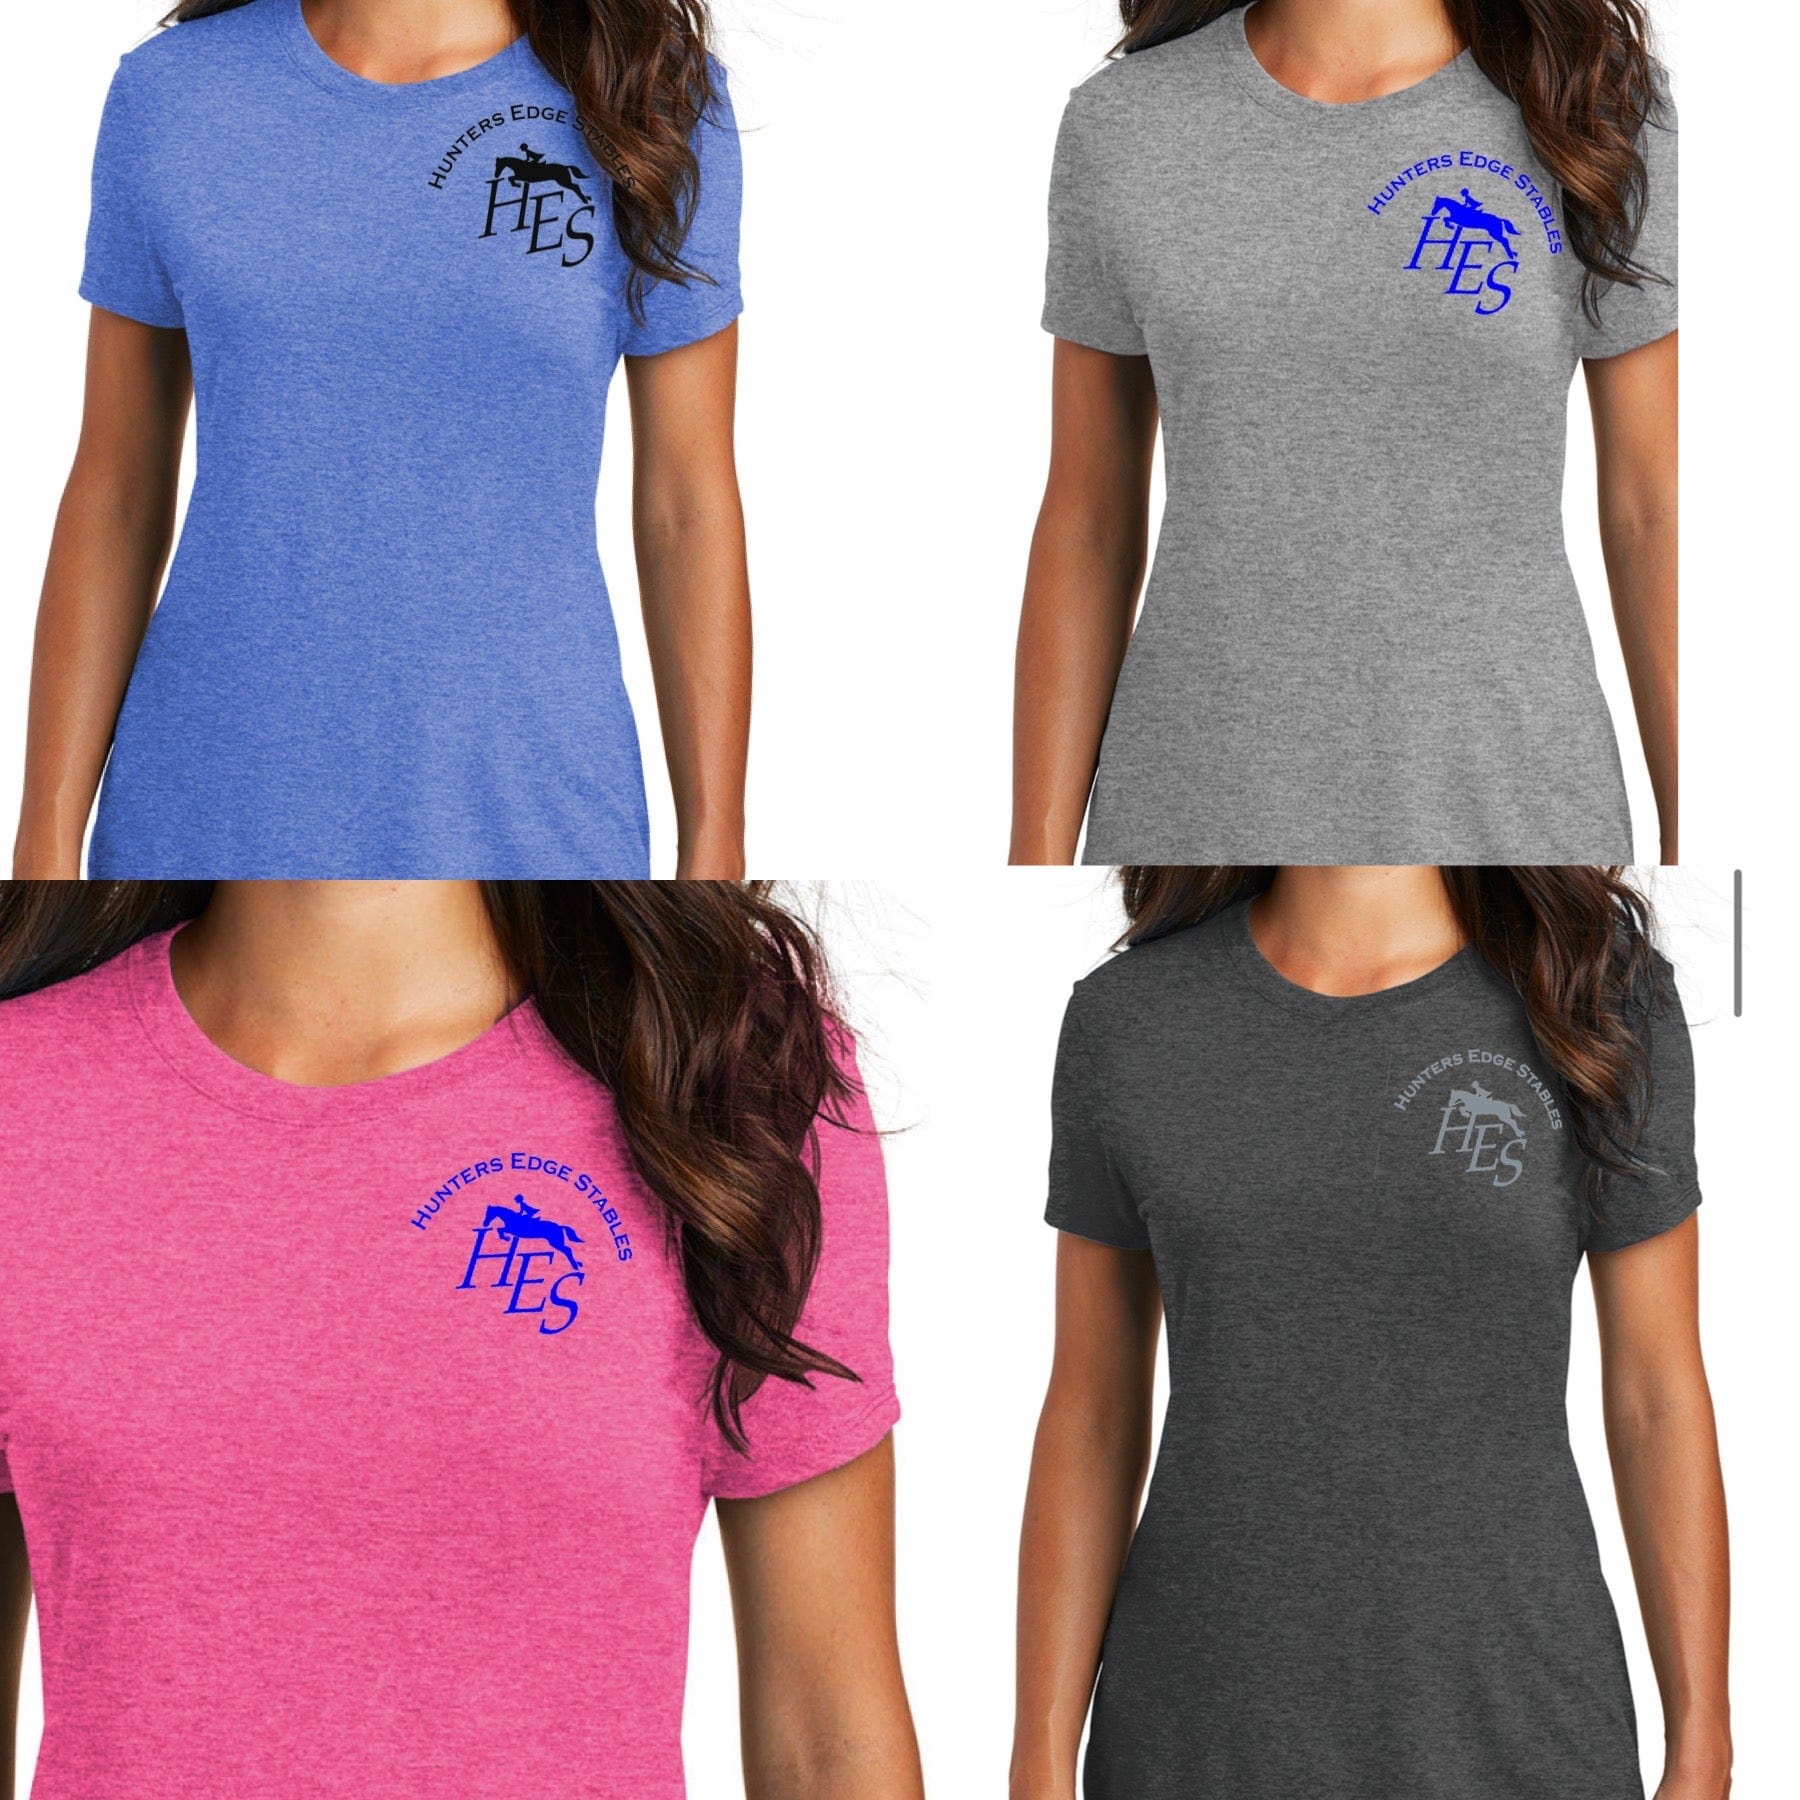 Equestrian Team Apparel Hunters Edge Stables Tee shirts equestrian team apparel online tack store mobile tack store custom farm apparel custom show stable clothing equestrian lifestyle horse show clothing riding clothes horses equestrian tack store